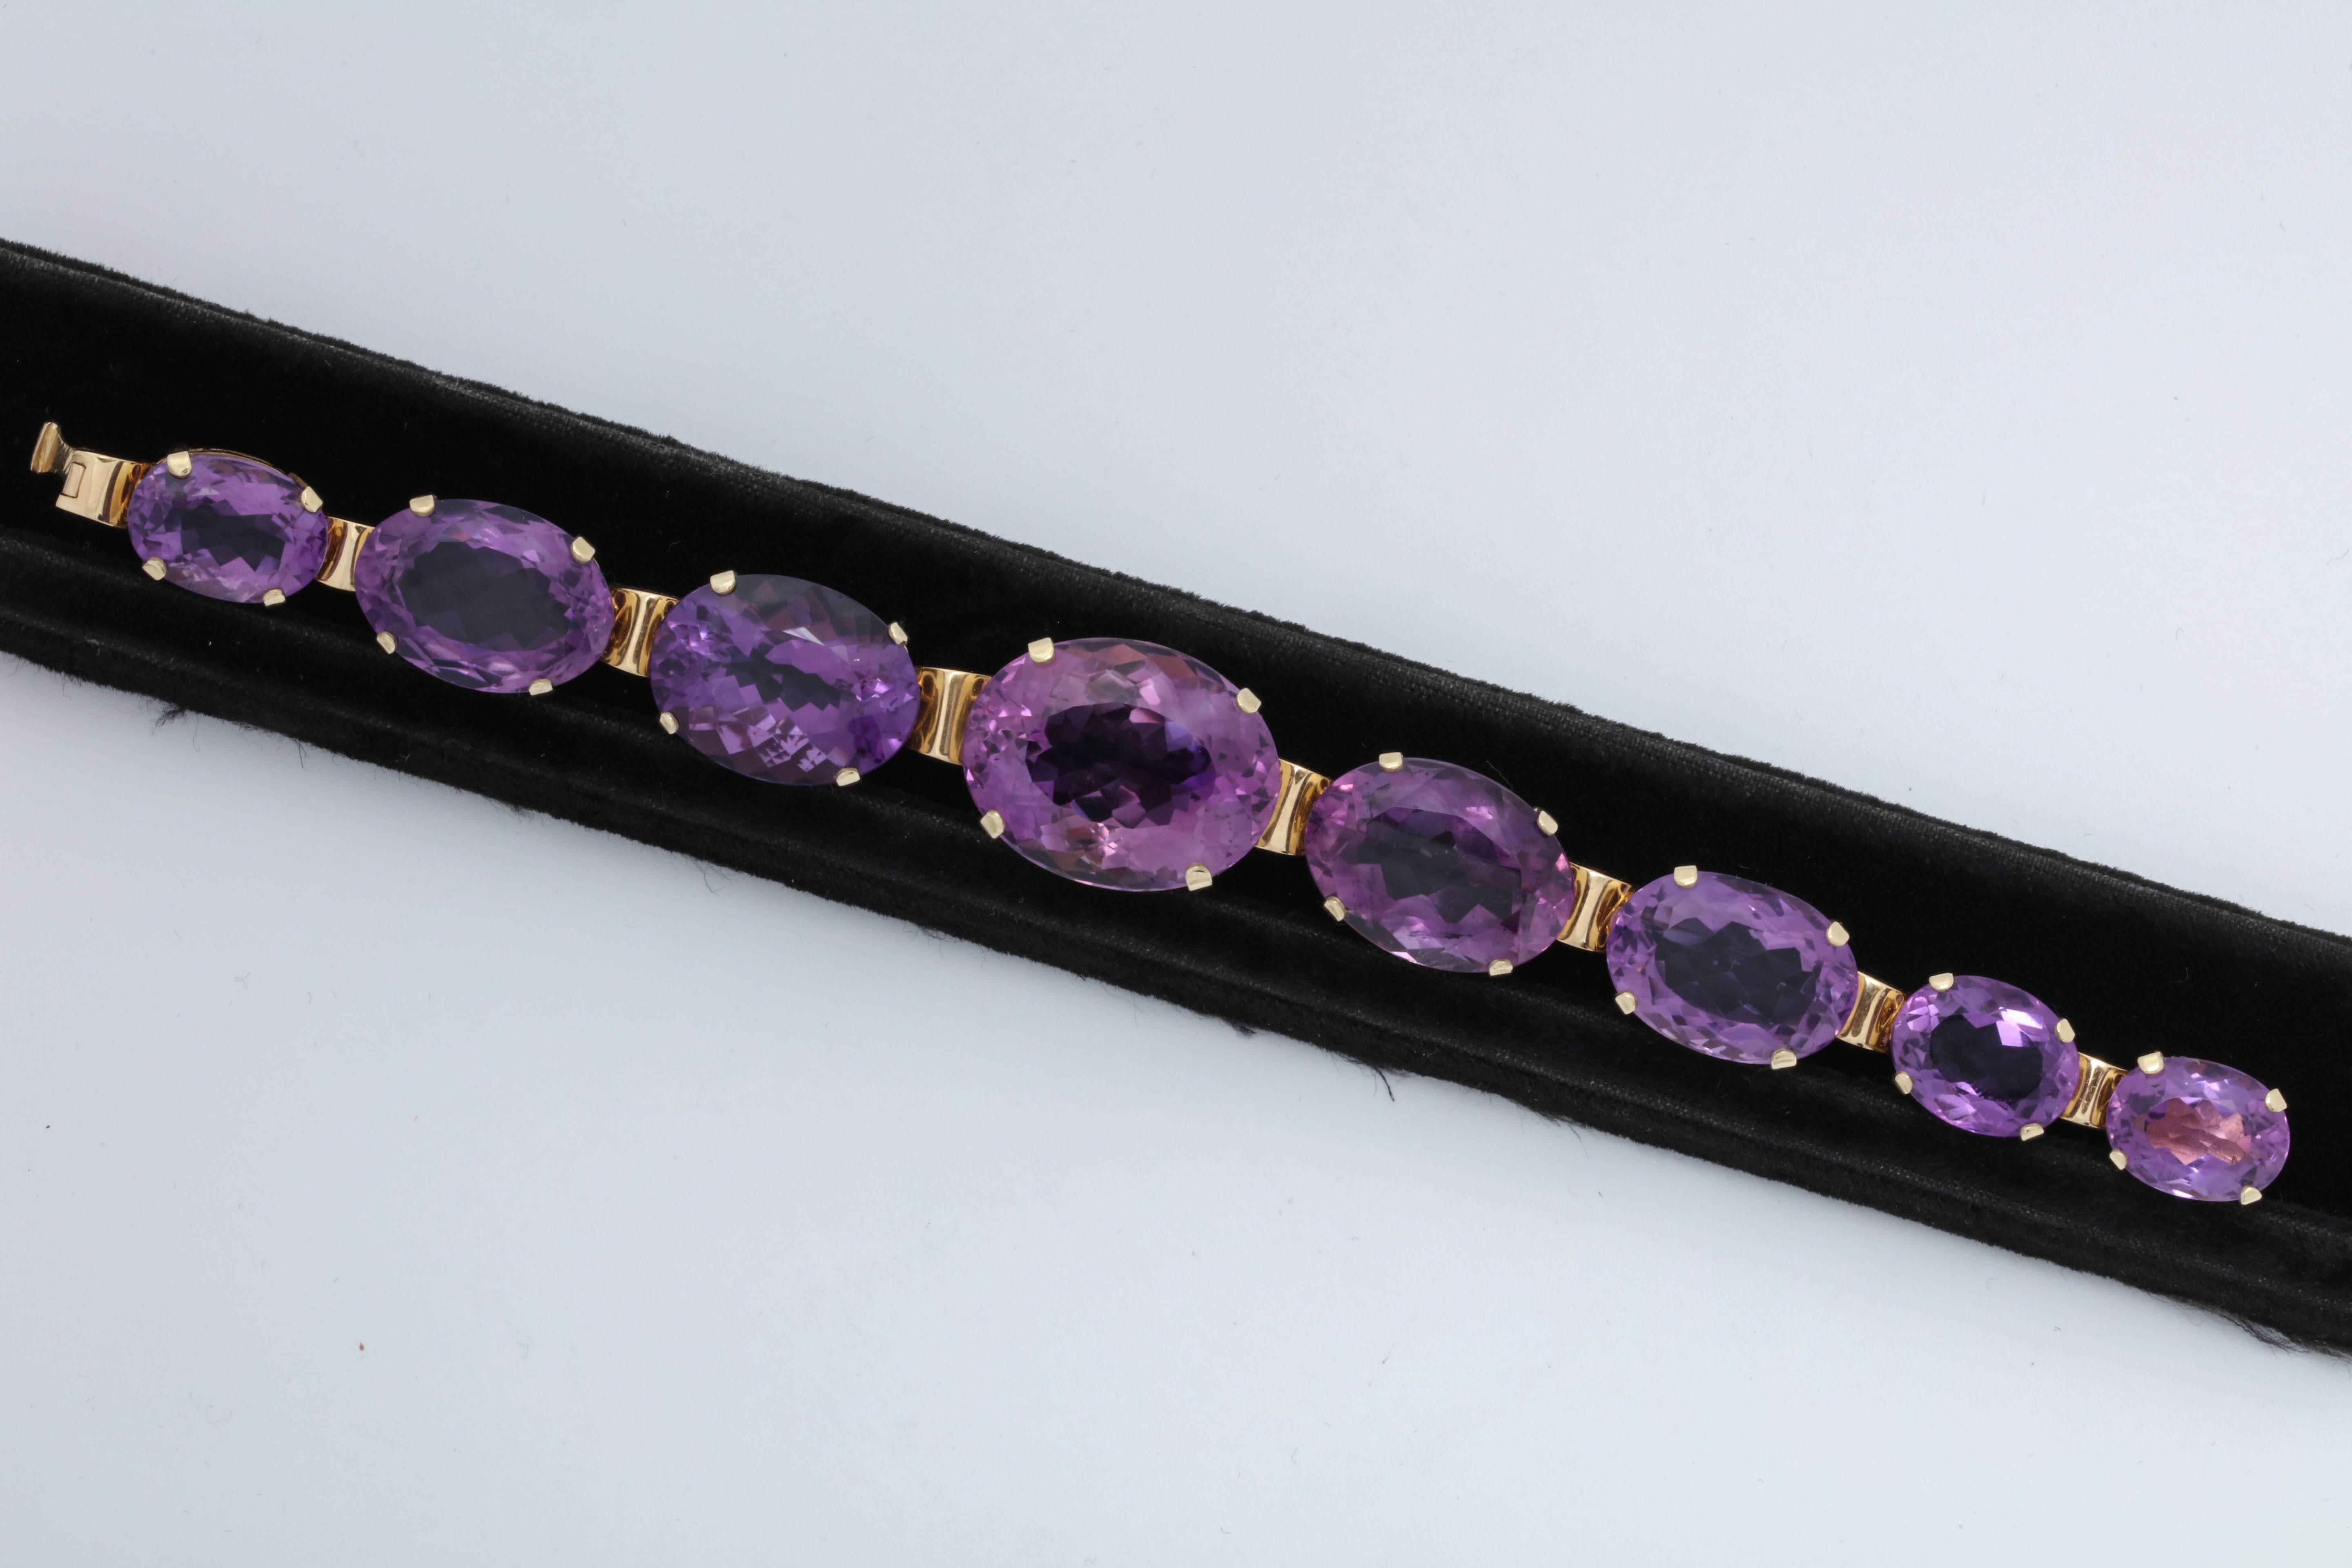 One Ladies 18kt Open And Reticulated Gold Craftmanship Is The Setting For This Horizontal Set Amethyst Link Bracelet. All Stones Are Beautifully Set In A Heavy Four Prong setting. Total Weight Of This Beautiful Gem Quality Color Amethyst Bracelet Is